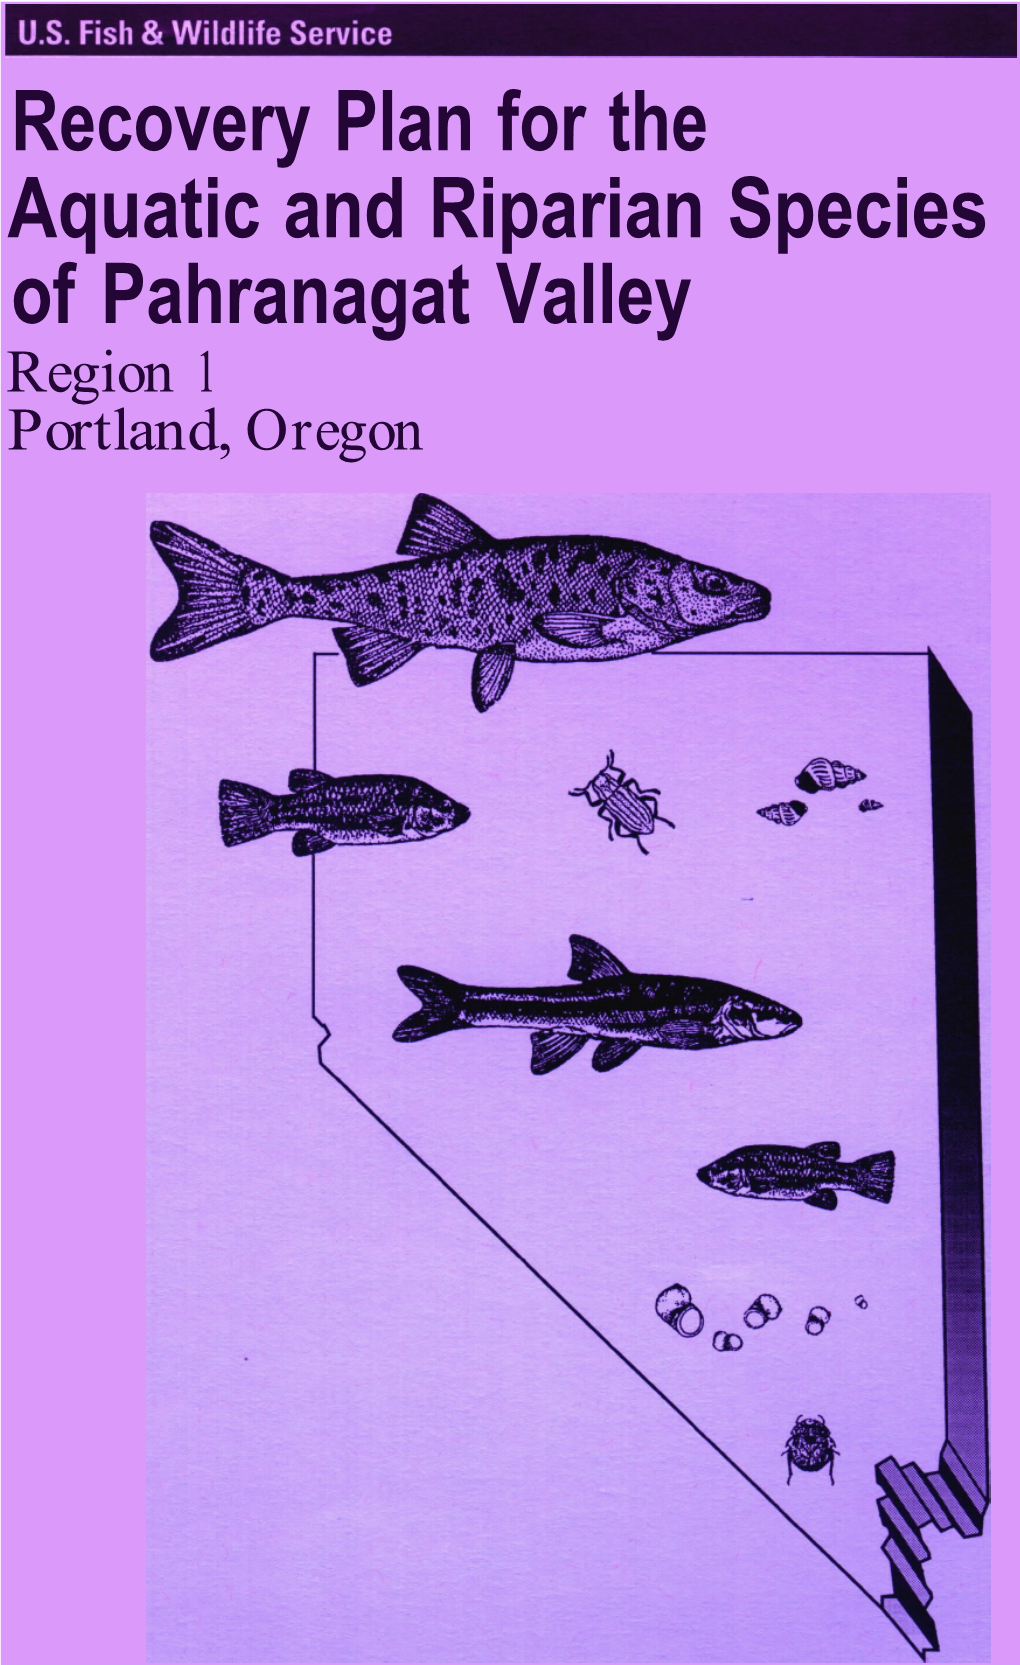 Recovery Plan for the Aquatic and Riparian Species of Pahranagat Valley Region 1 Portland, Oregon RECOVERY PLAN